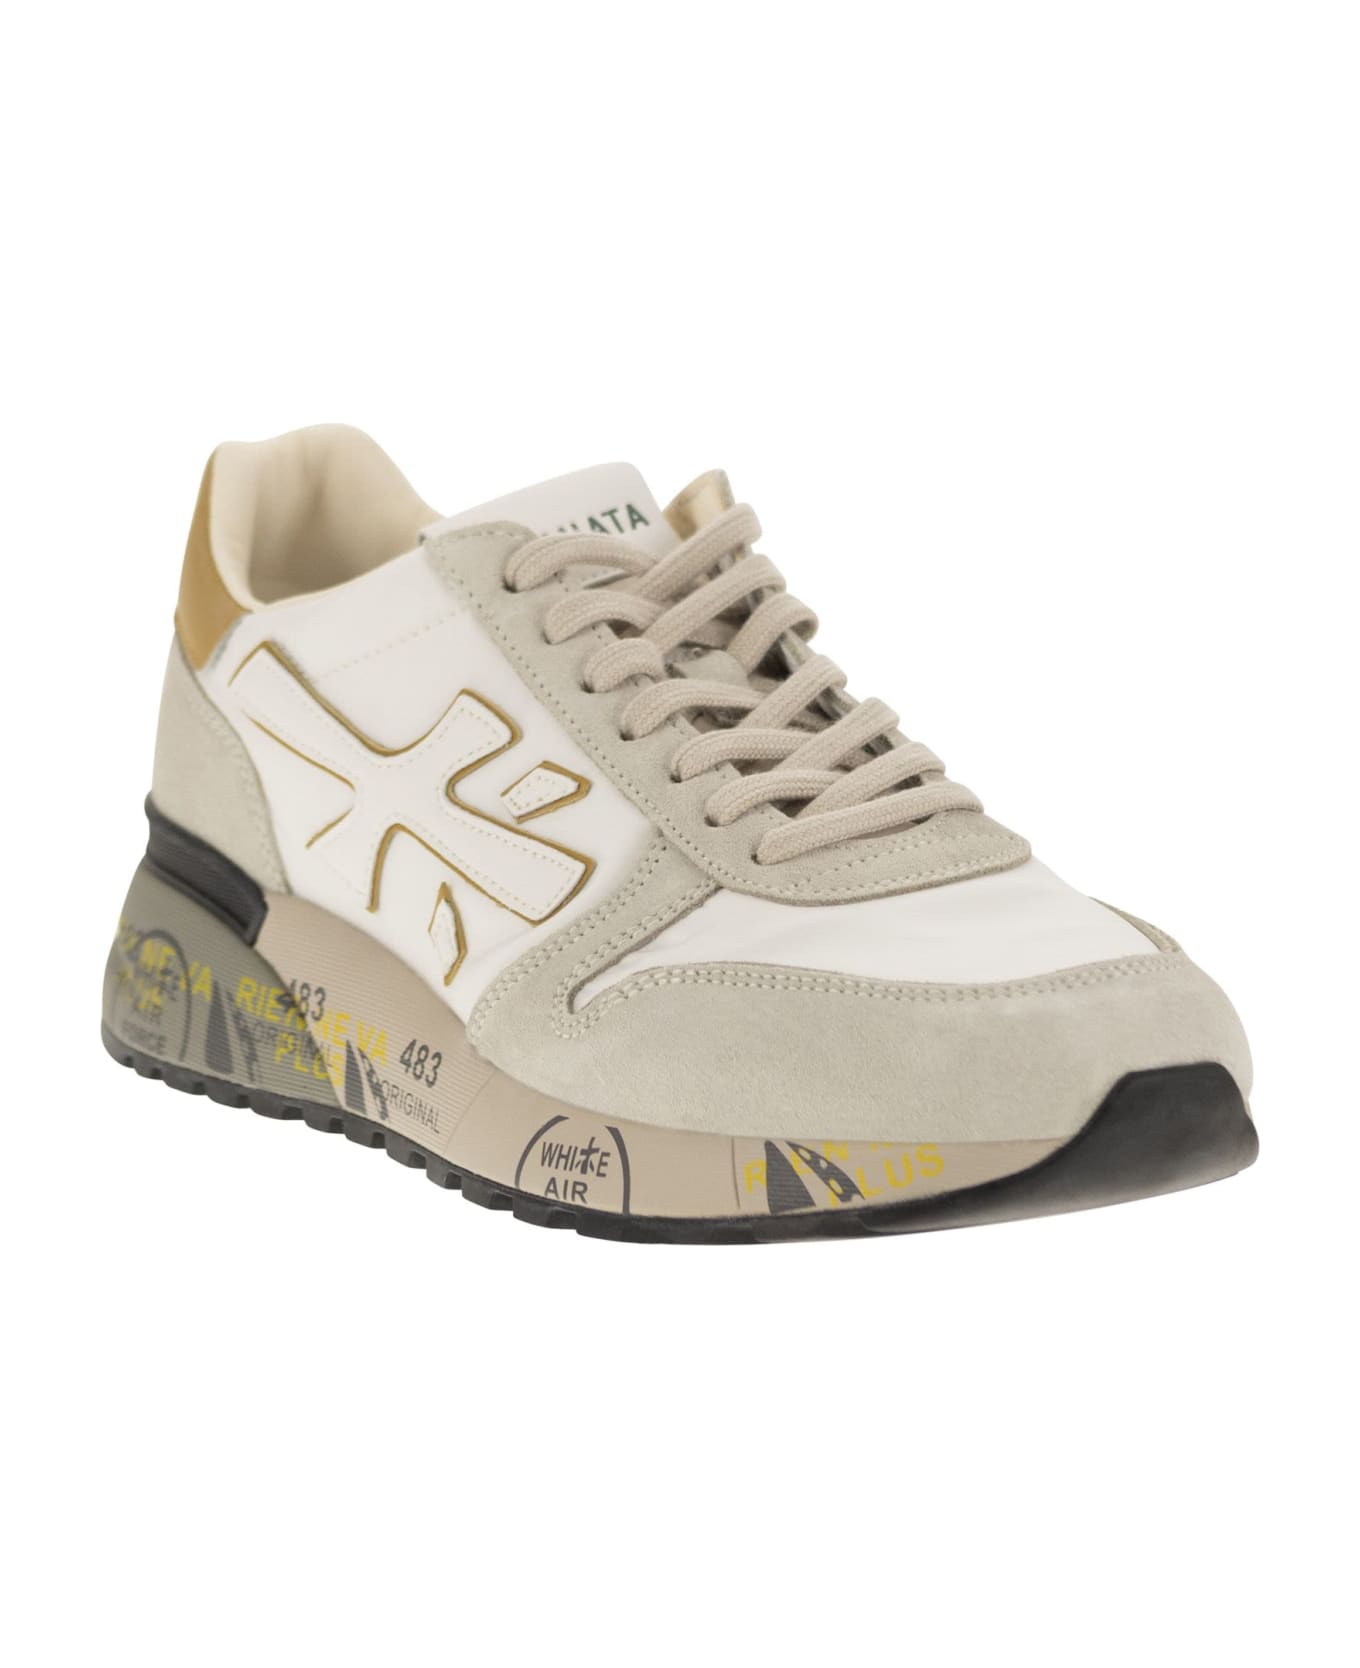 Premiata Mick Suede, Nylon And Leather Sneakers - White/grey スニーカー